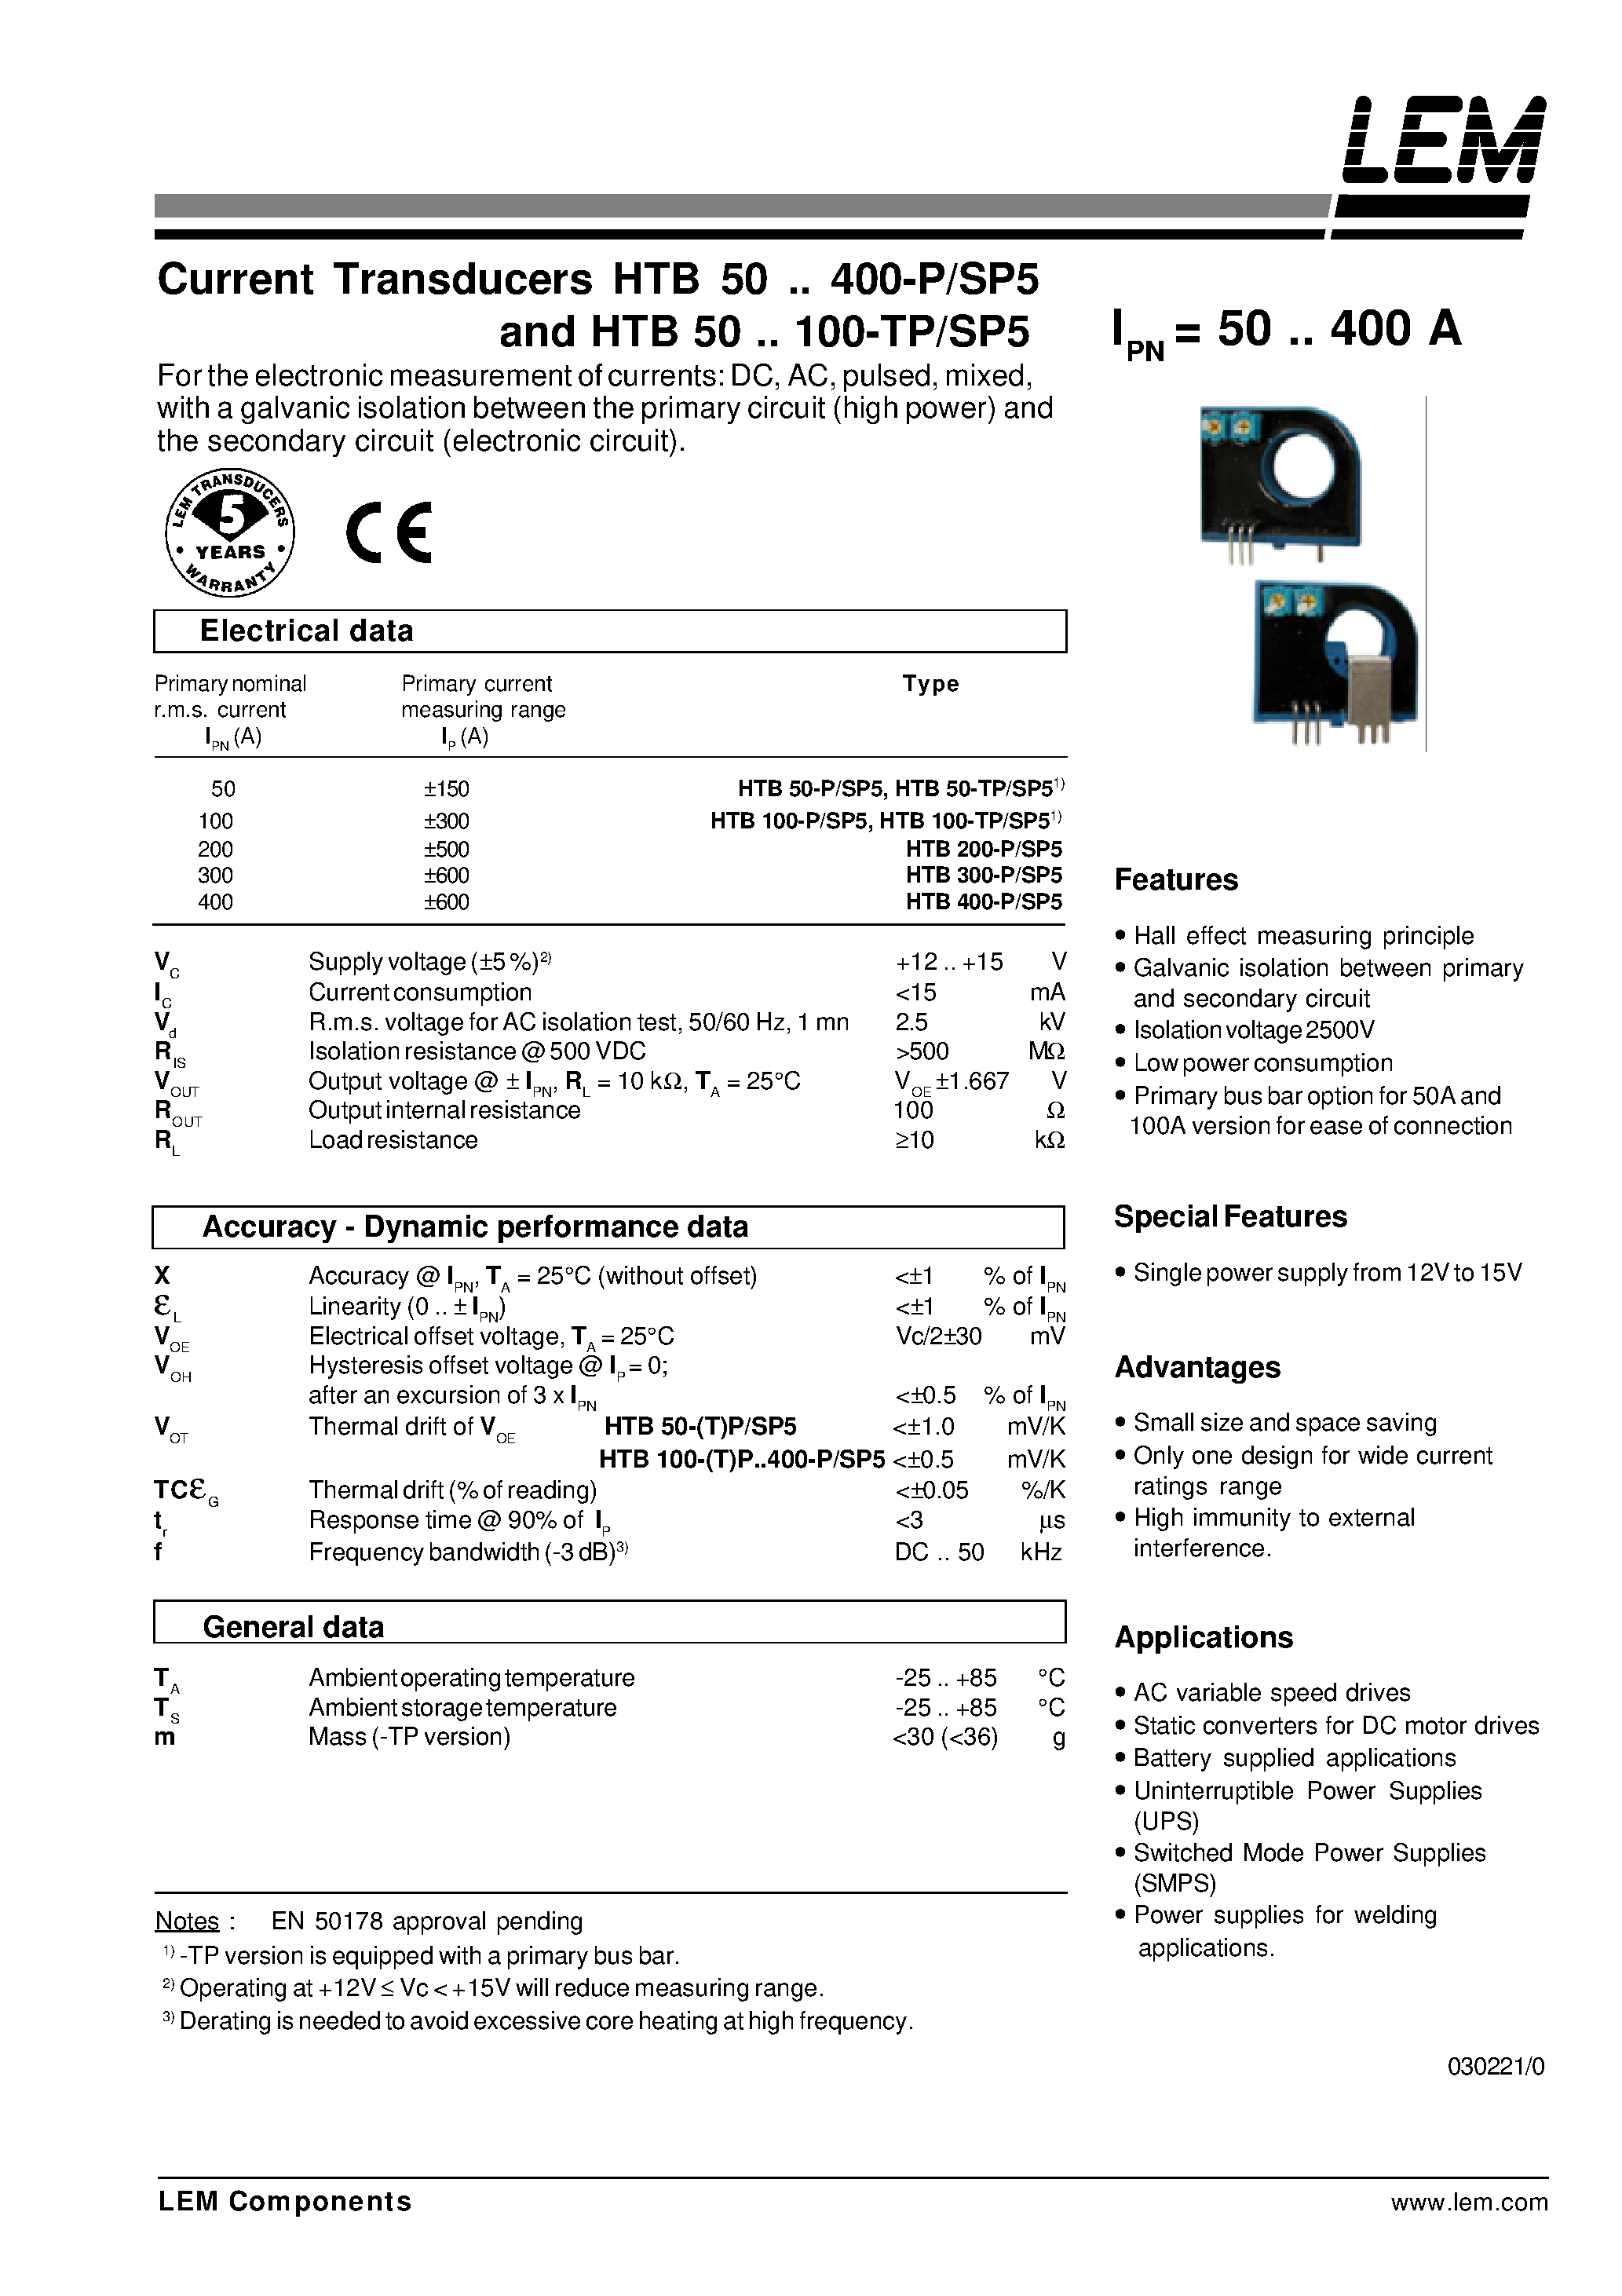 Datasheet HTB100-P - Current Transducers HTB 50~400-P and HTB 50~100-TP page 1